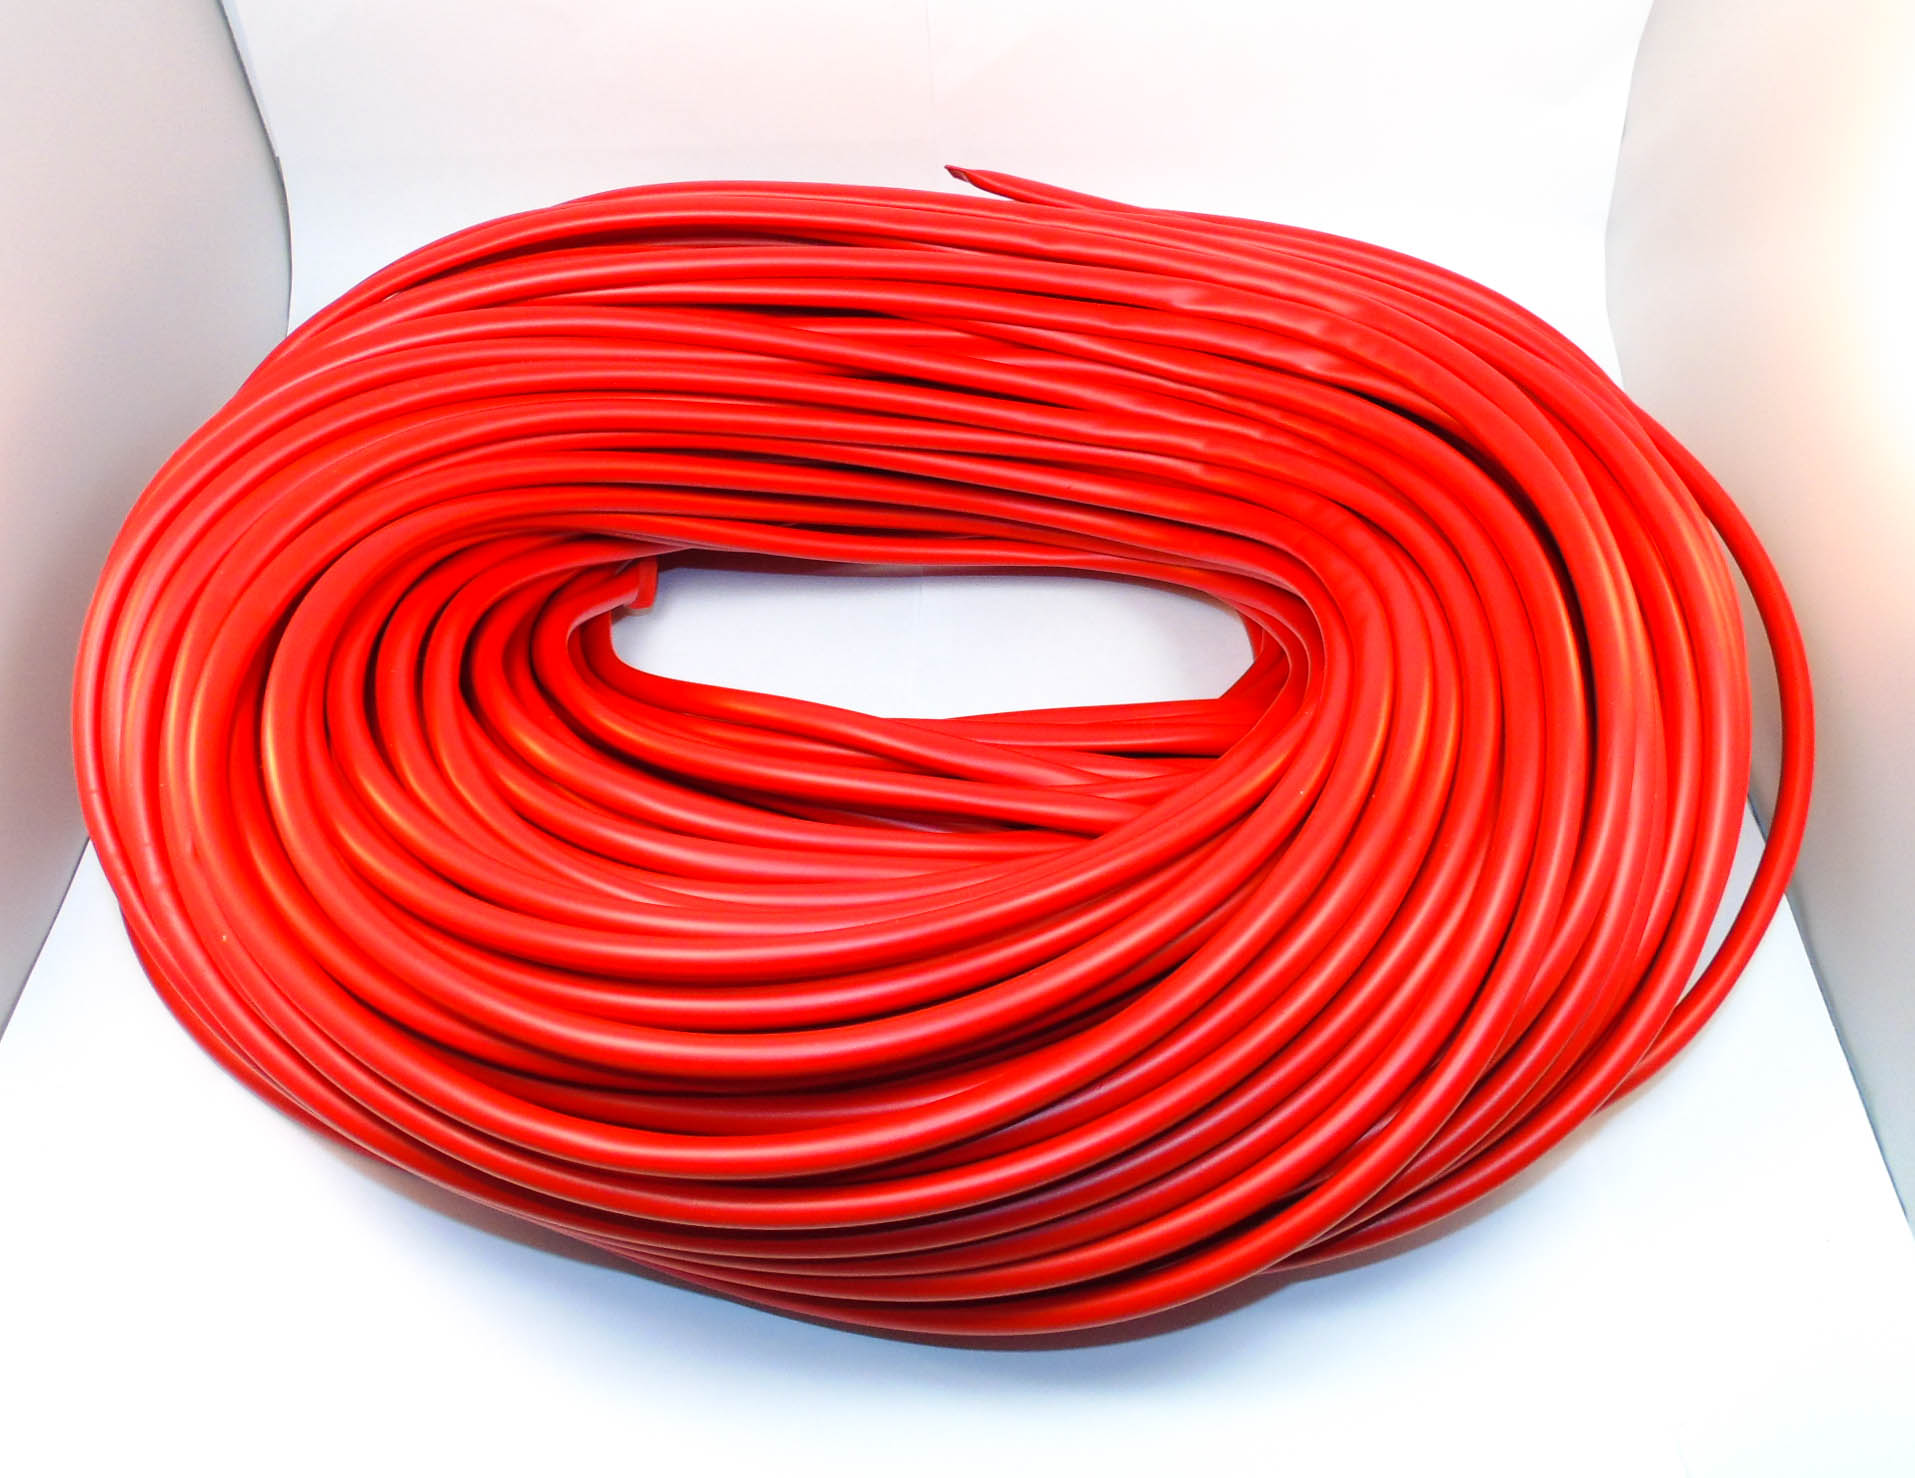 6mm PVC Sleeving Red 100m Coil